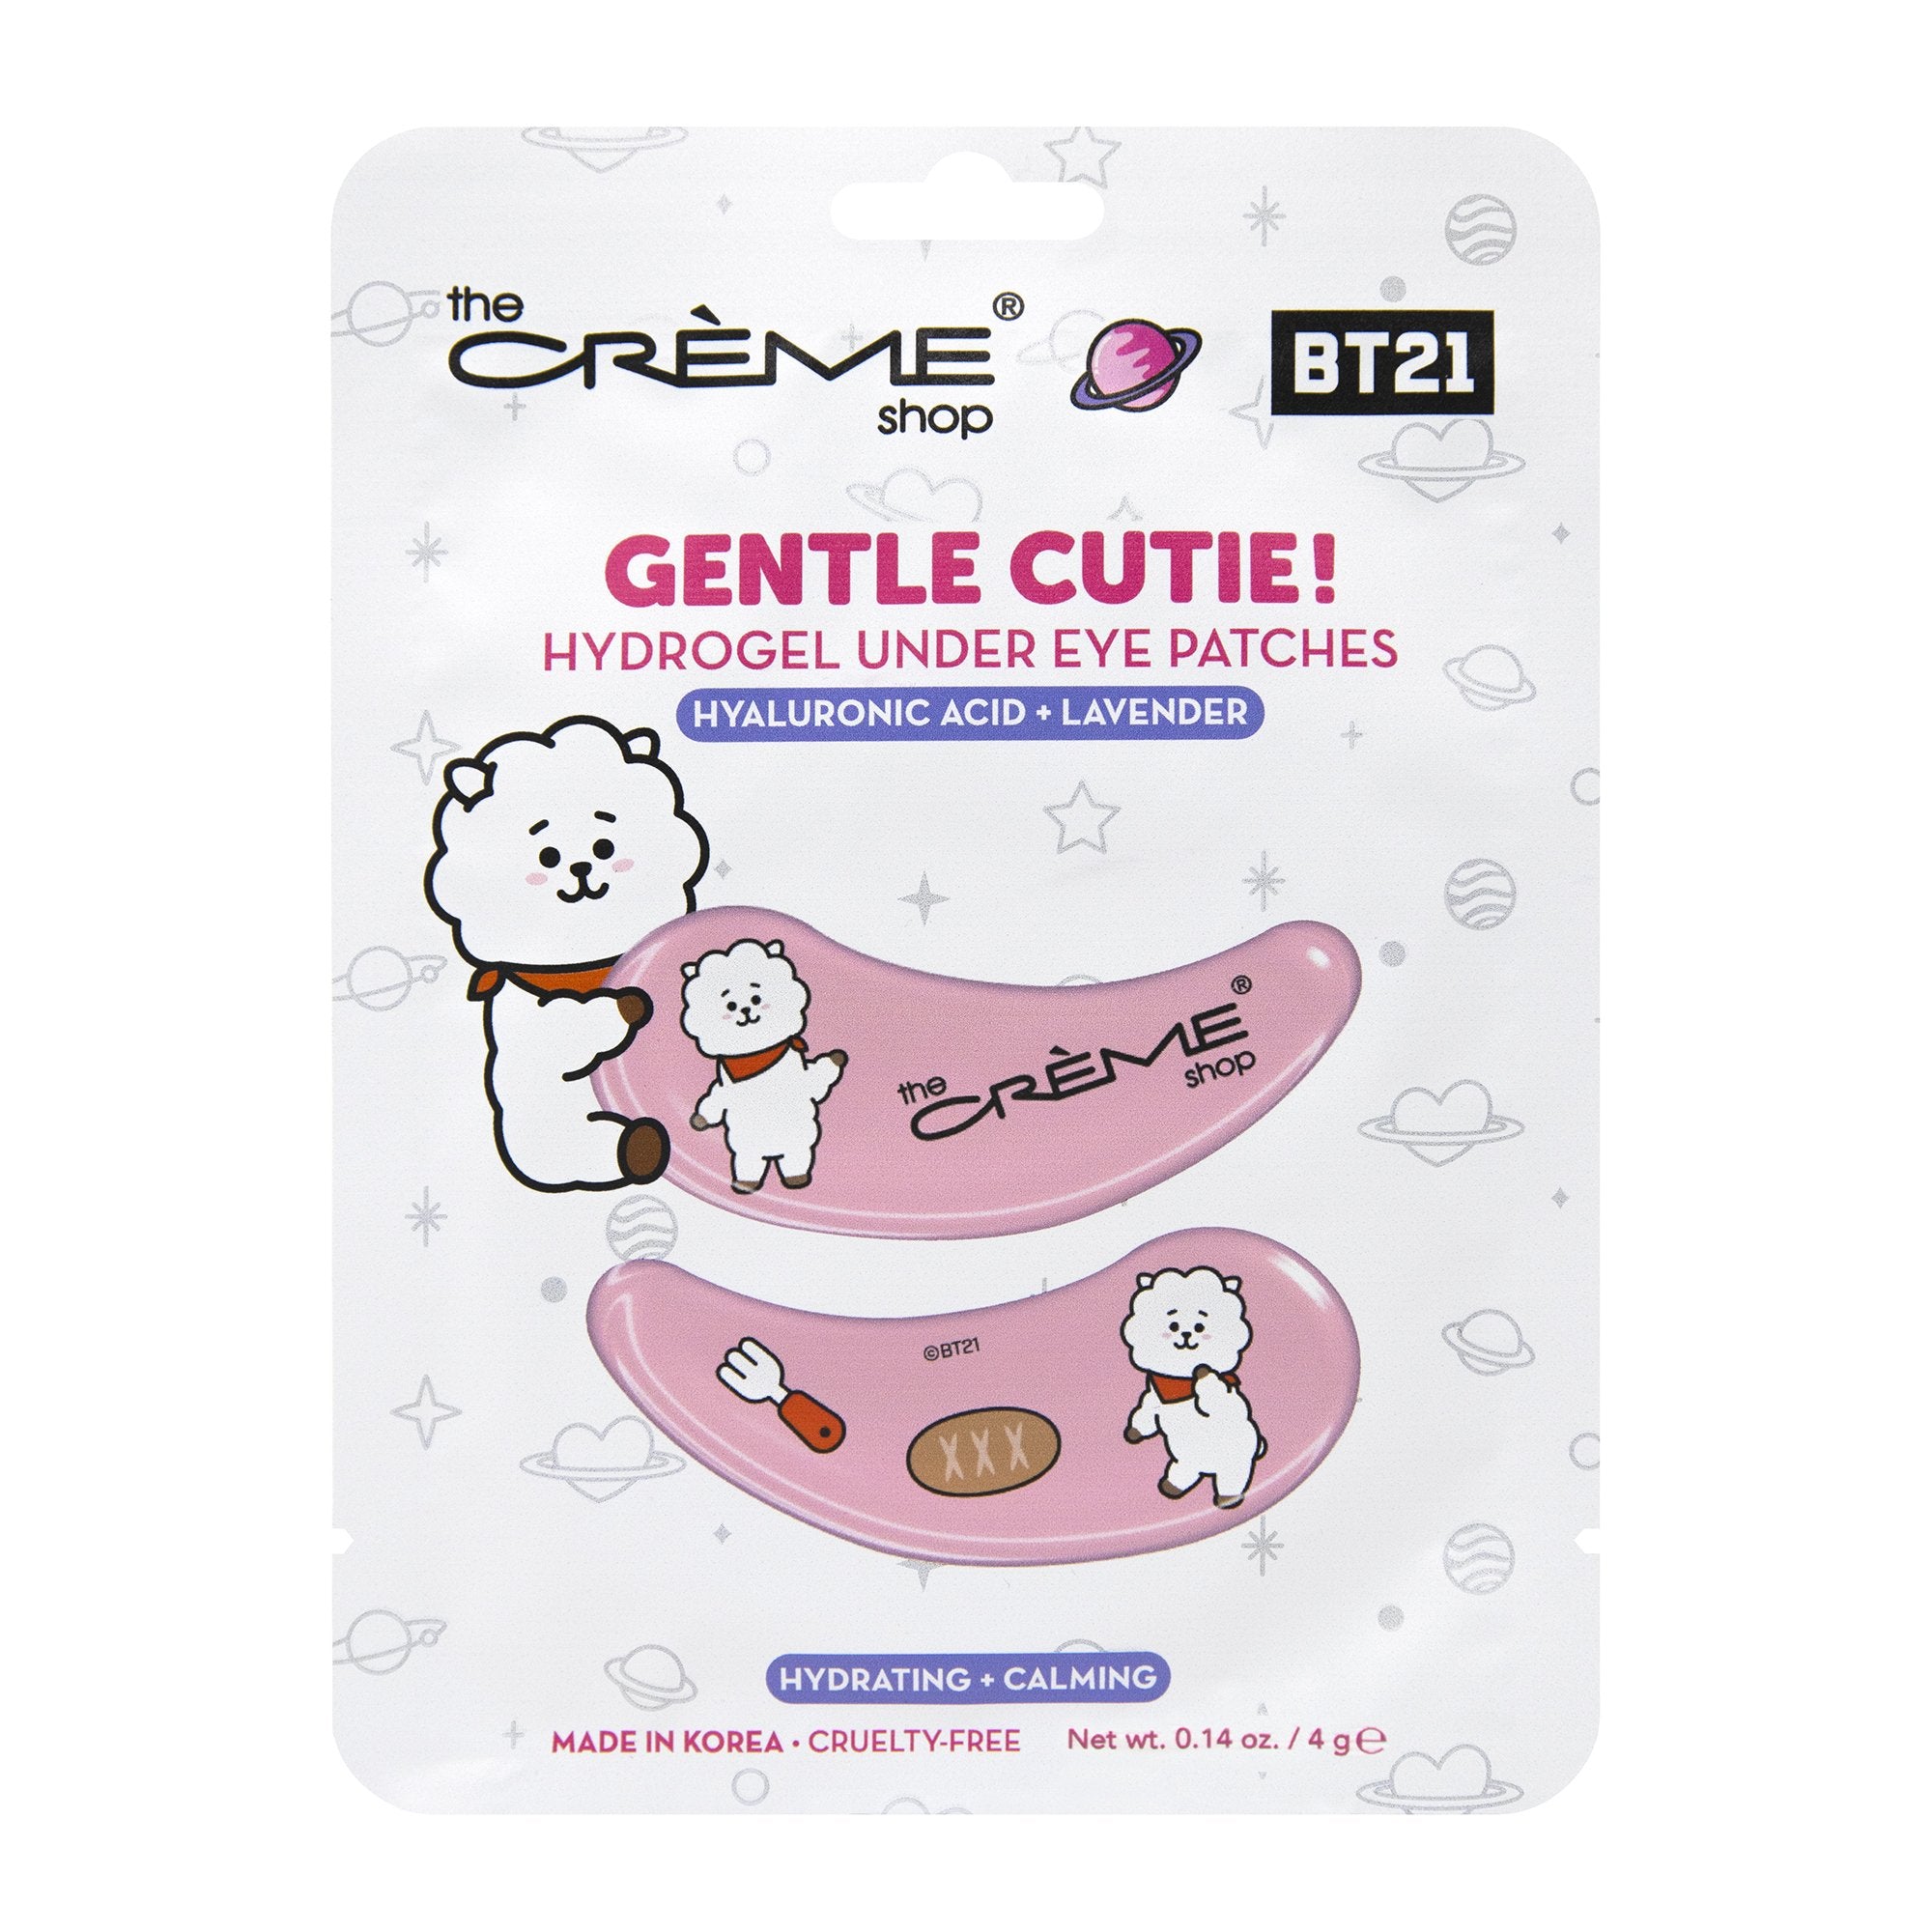 “Gentle Cutie!” RJ Hydrogel Under Eye Patches | Hydrating & Calming Under Eye Patches The Crème Shop x BT21 